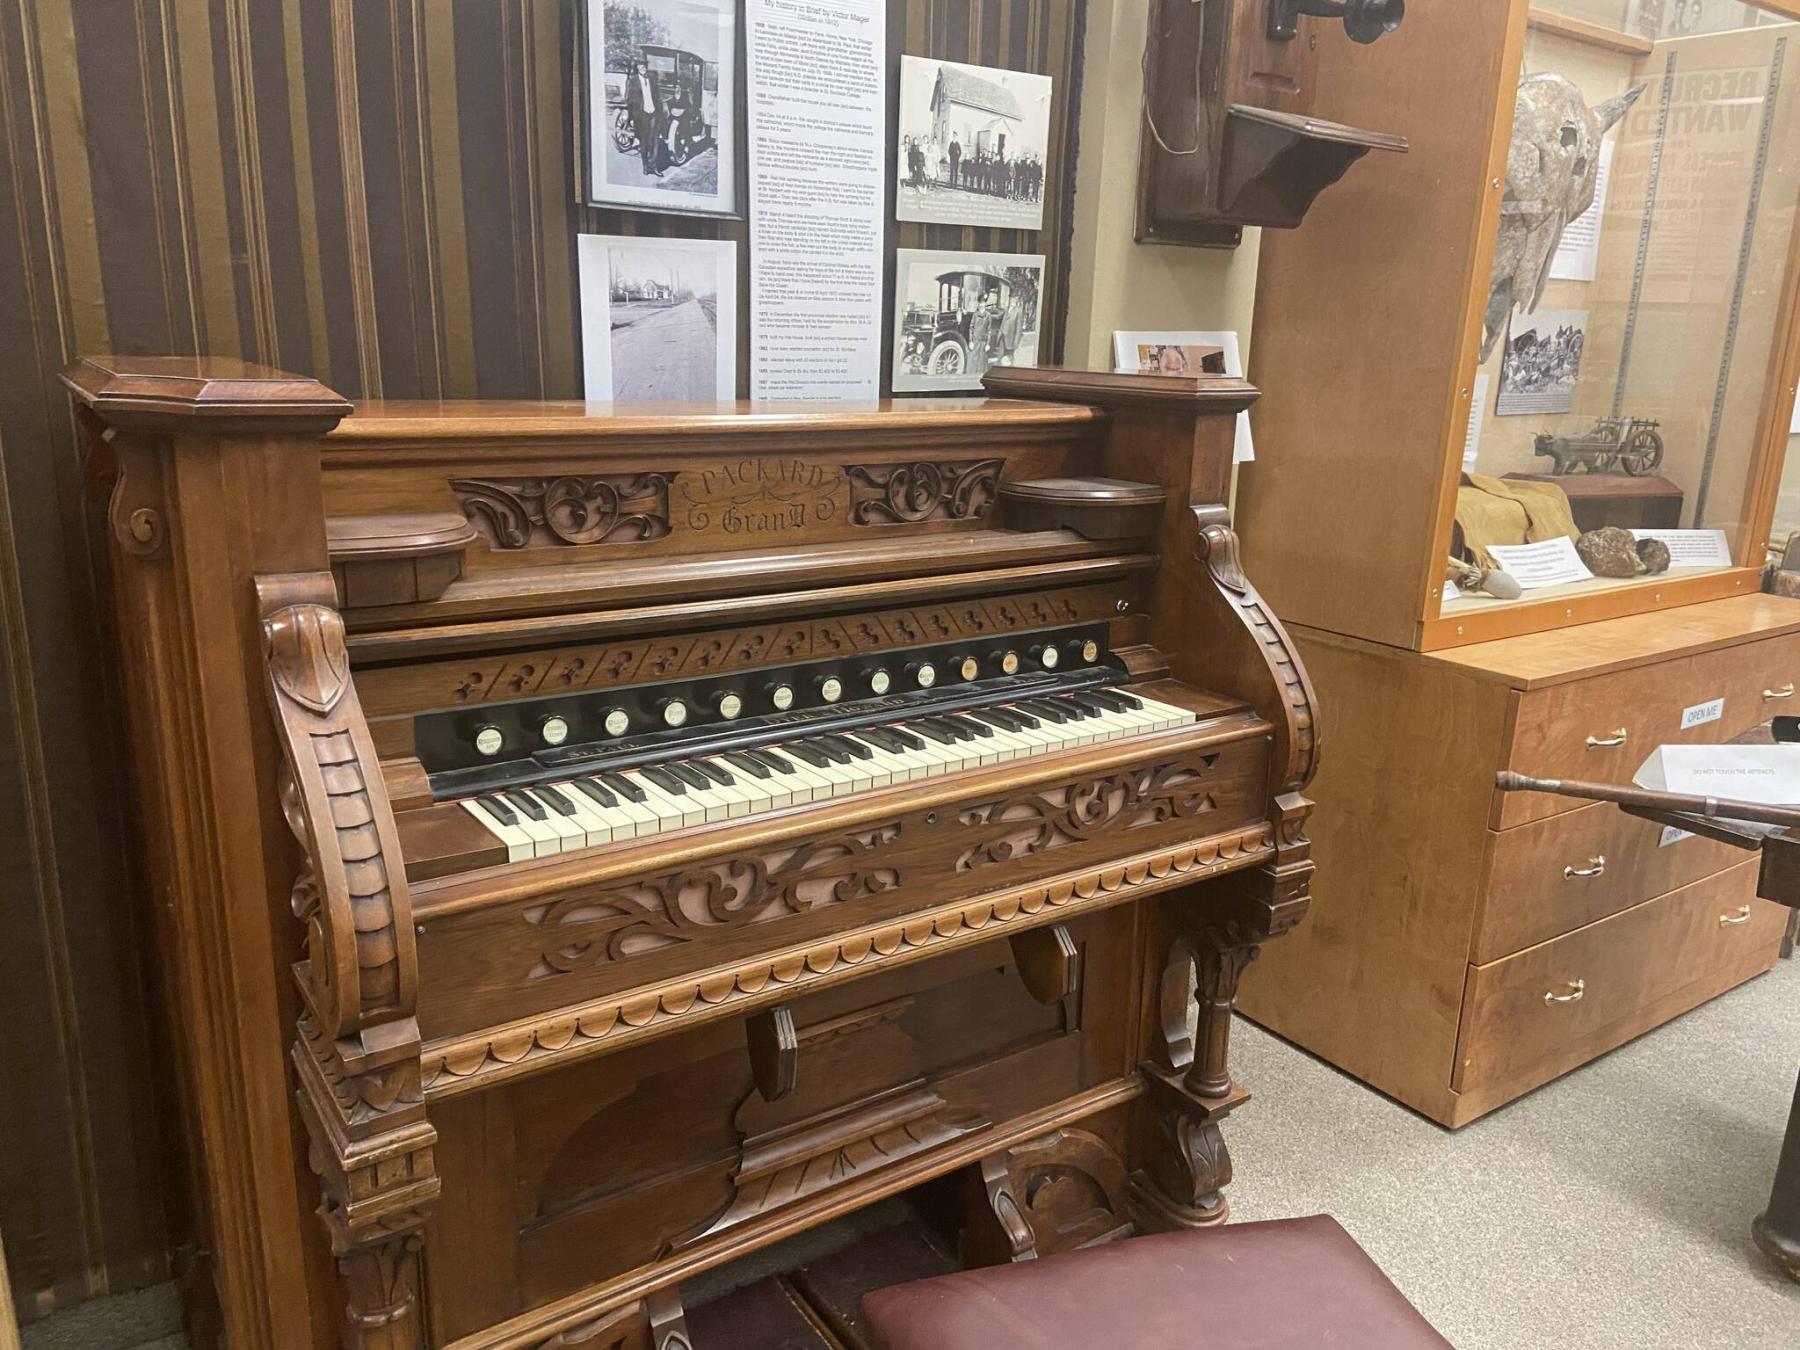  <p>Laurie Mustard / Winnipeg Free Press</p>
                                <p>This beautiful old pump organ has been spared from the dump, and re-homed to the St. Vital Museum.</p> 